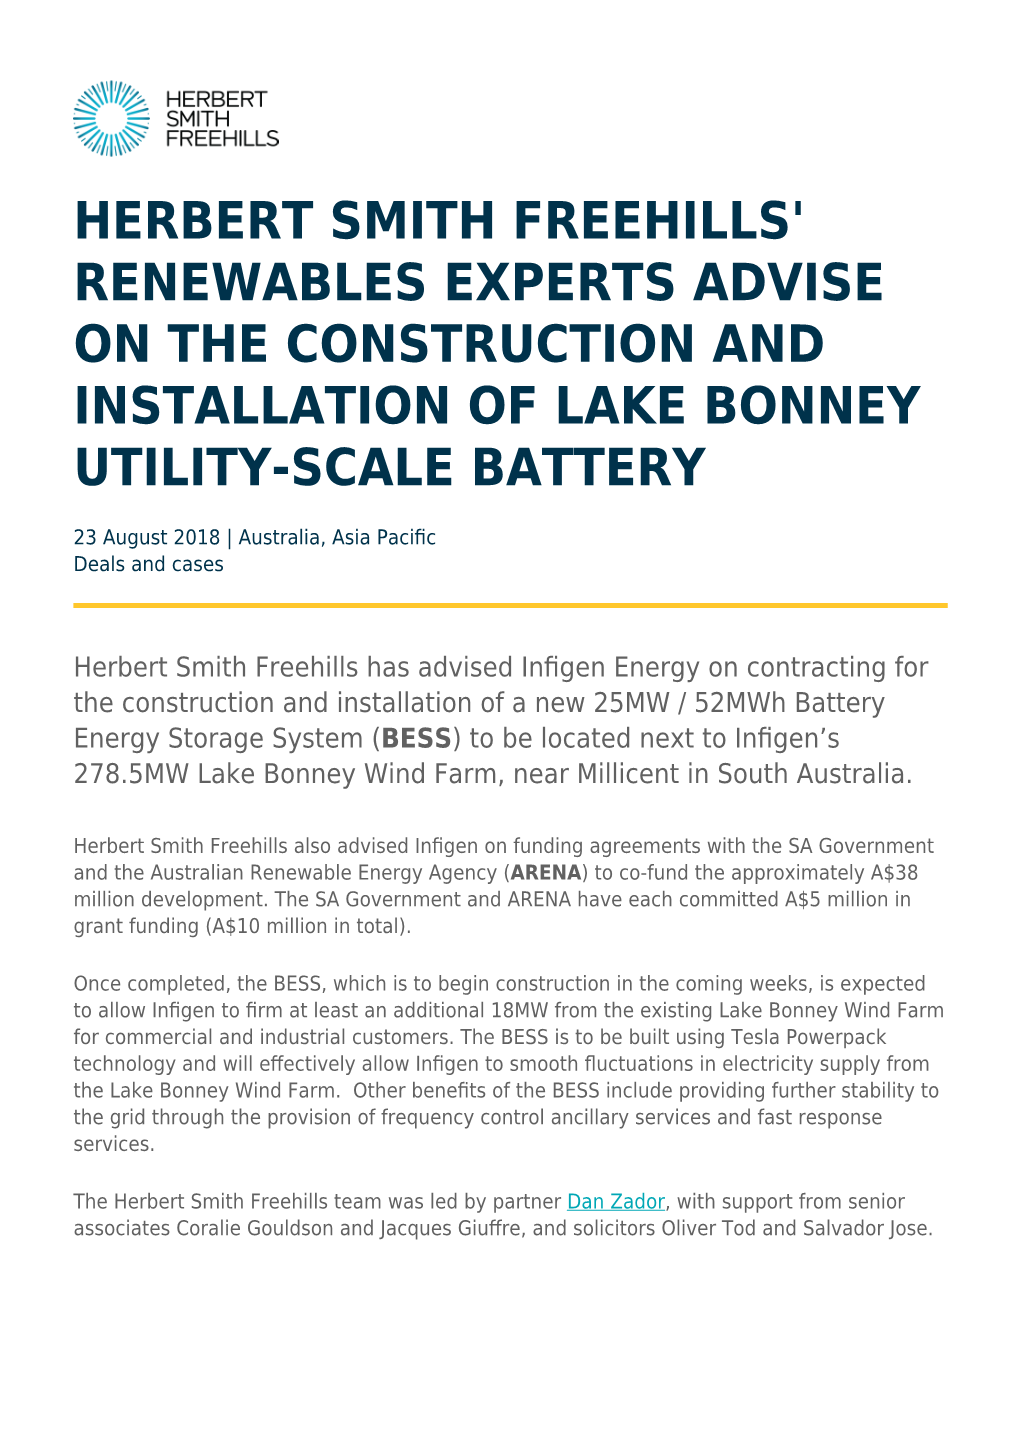 Renewables Experts Advise on the Construction and Installation of Lake Bonney Utility-Scale Battery